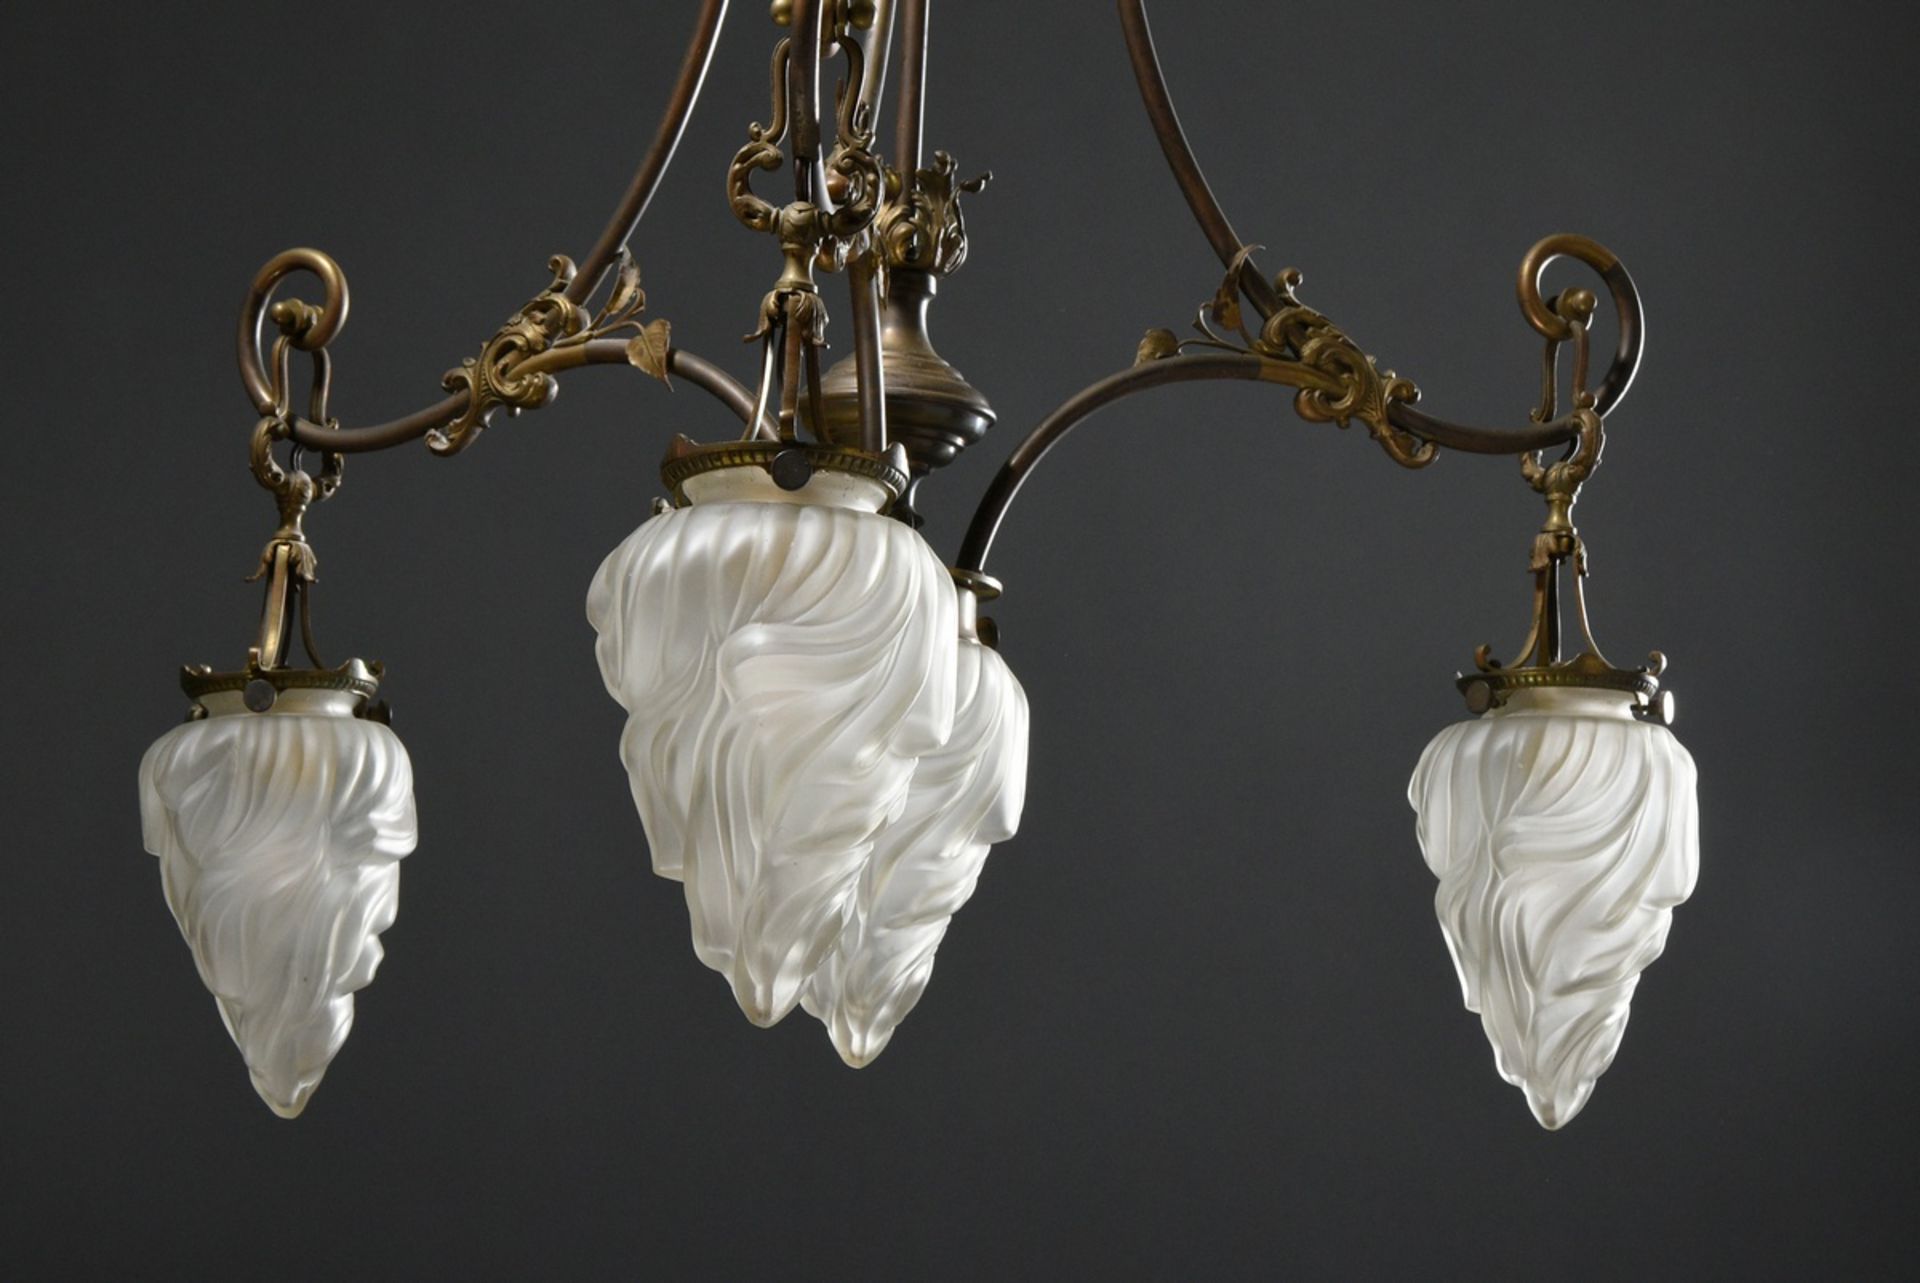 Wilhelminian period ceiling lamp with 4 frosted "flames" glass domes on brass frame with floral dec - Image 9 of 12